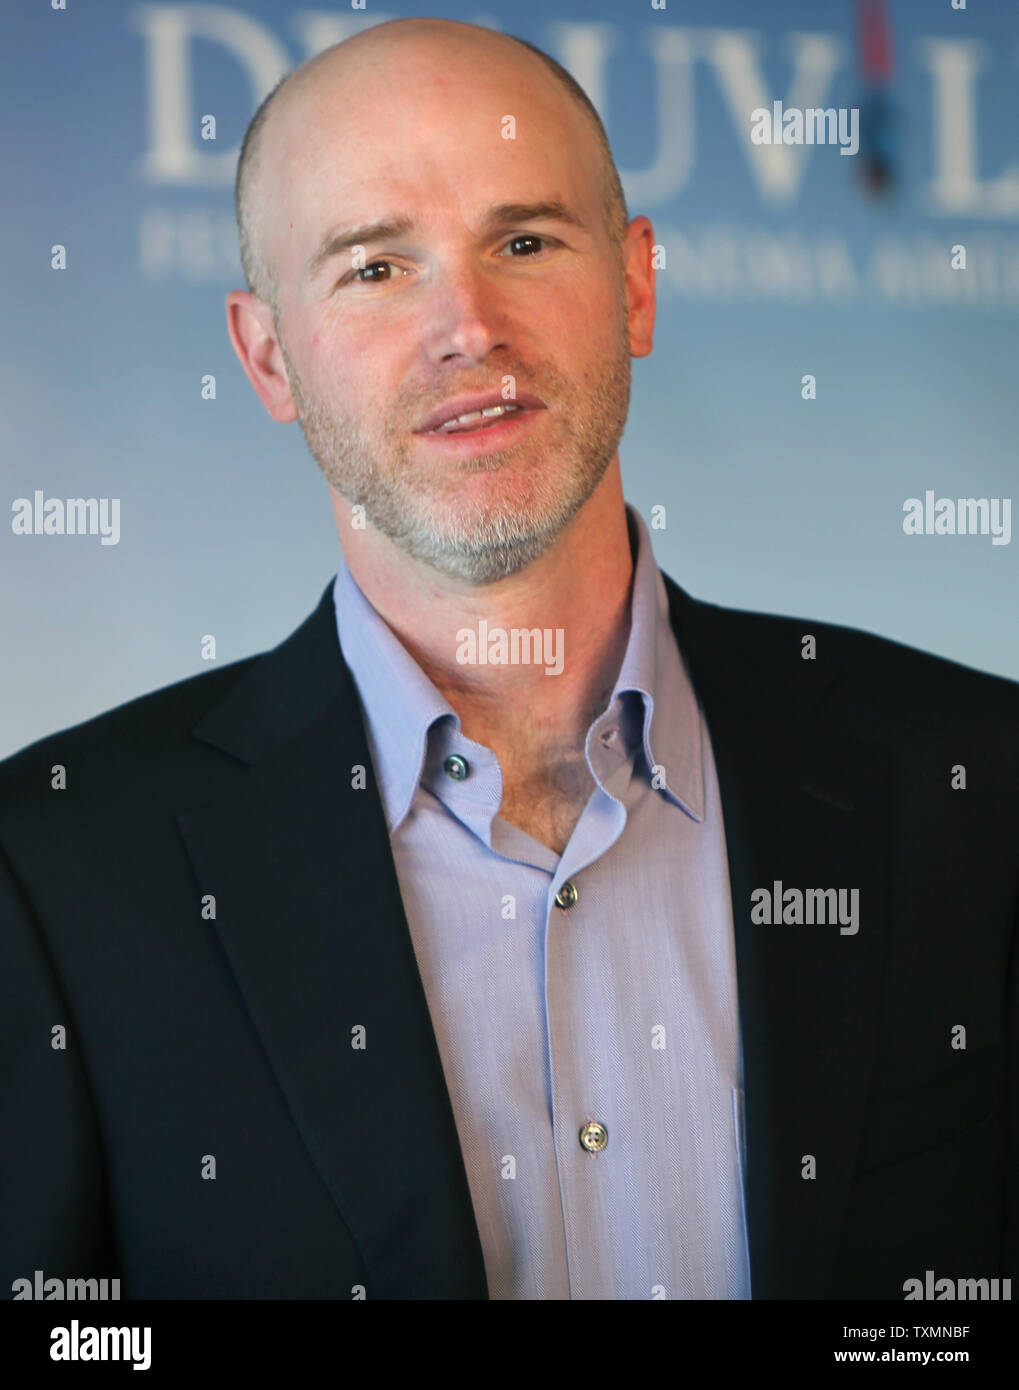 Director David Hollander arrives at a photocall for the film 'Personal Effects' during the 35th American Film Festival of Deauville in Deauville, France on September 7, 2009.    UPI/David Silpa Stock Photo